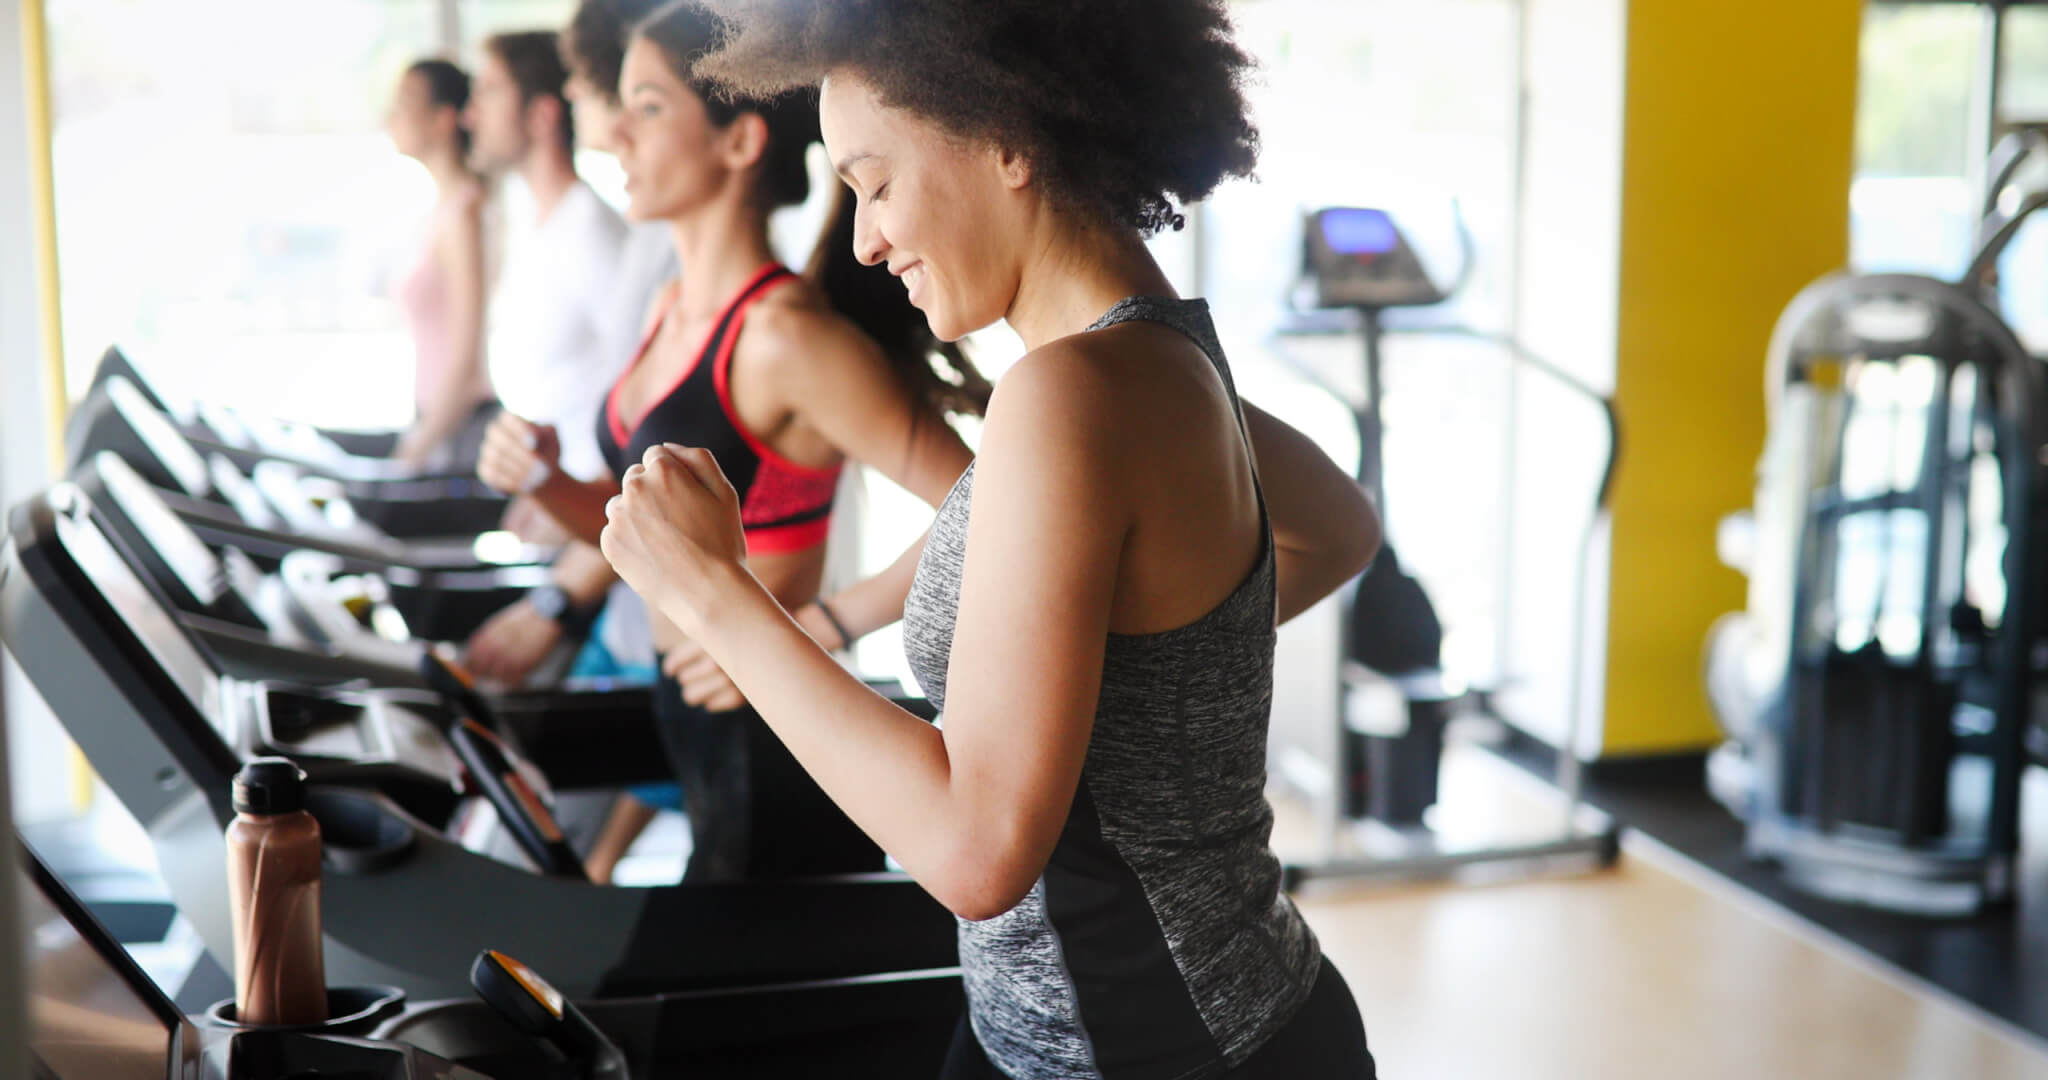 Women running on treadmill, working out